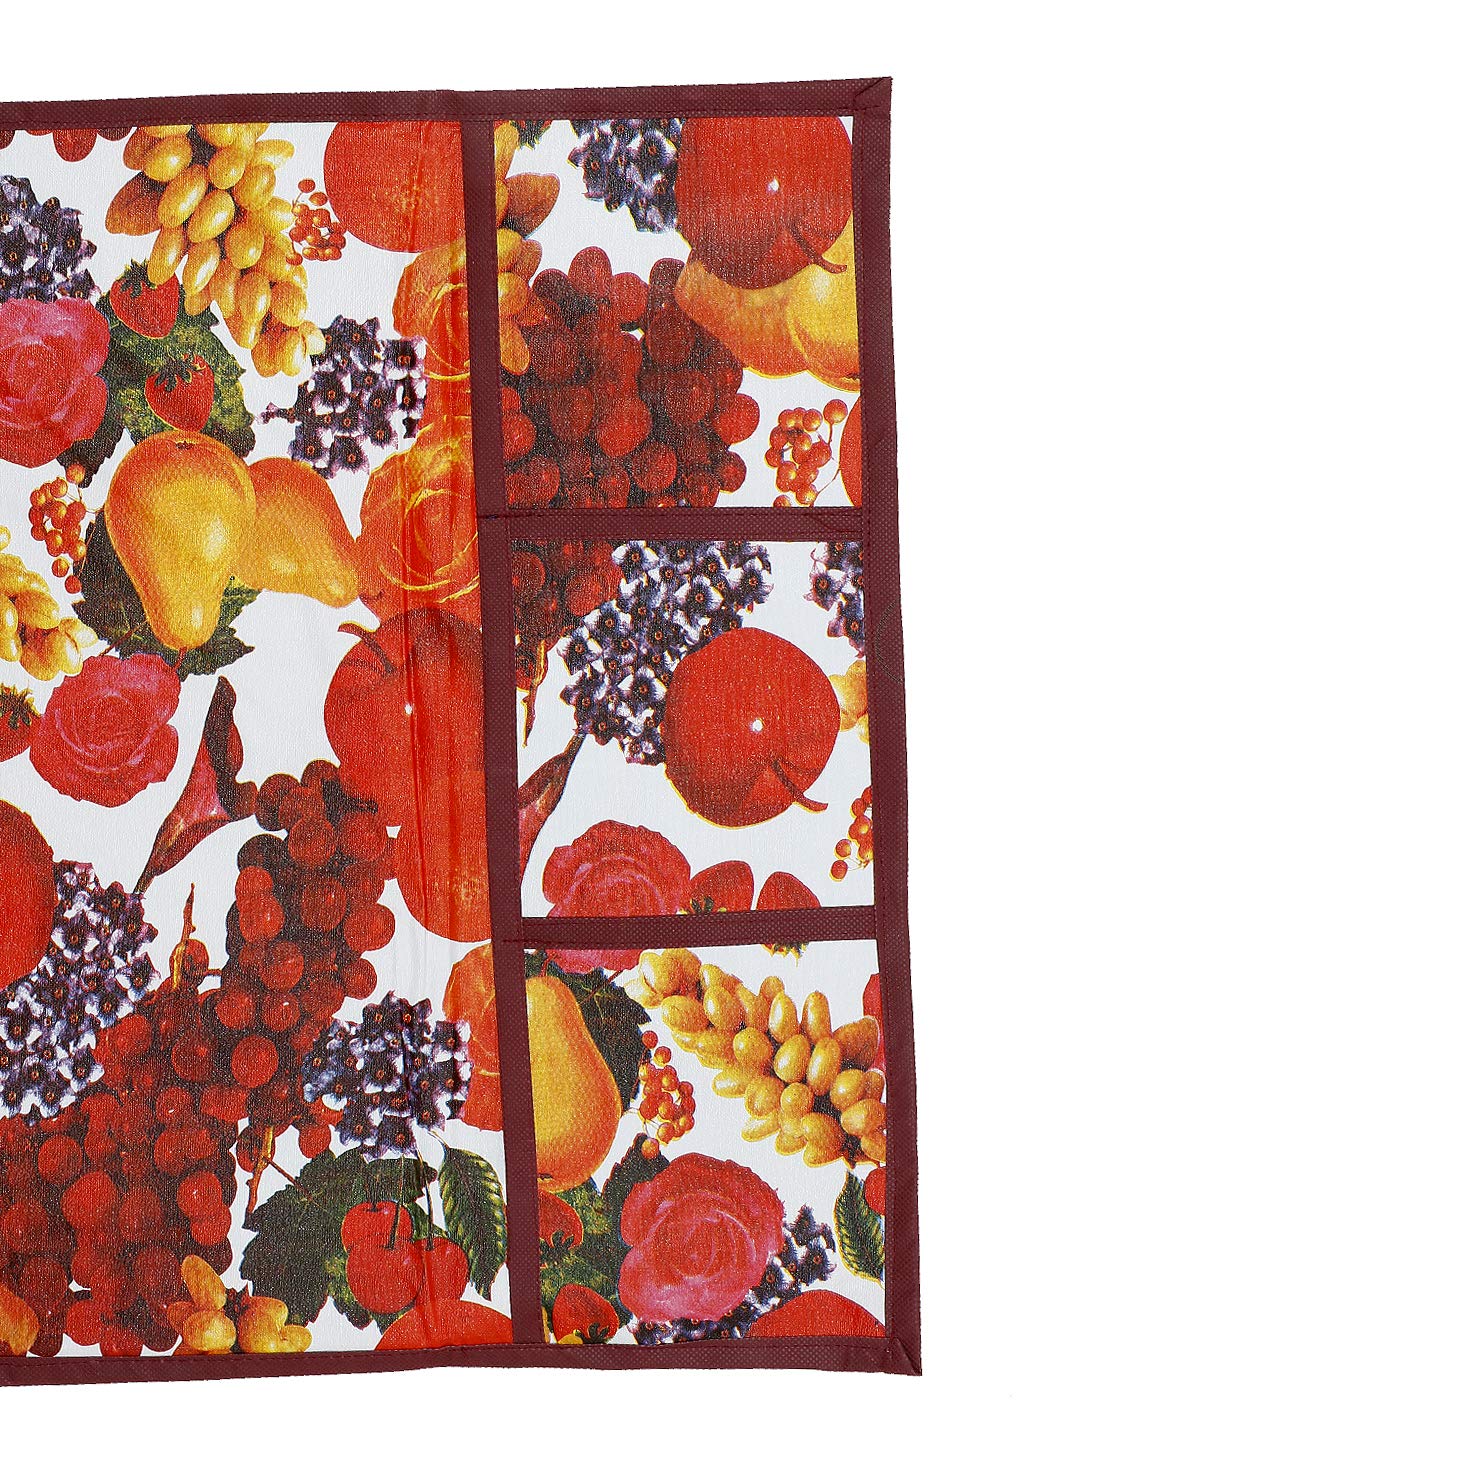 Kuber Industries Fruits Design 3 Pieces PVC Fridge Mats and 1 Piece Fridge Top Cover (Red & White) CTKTC34064